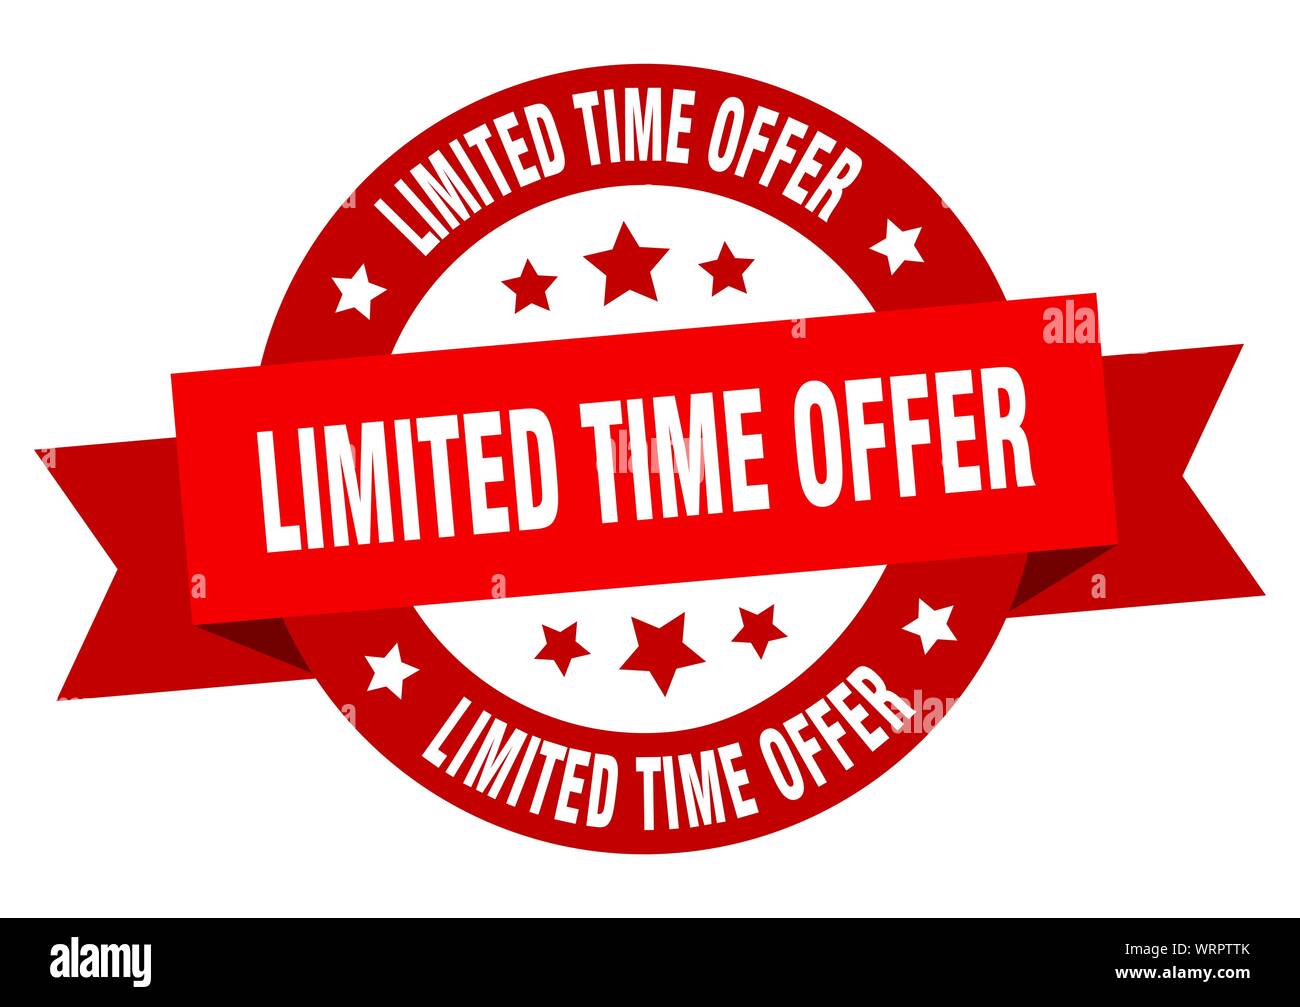 Done For You Limited Time Offer!